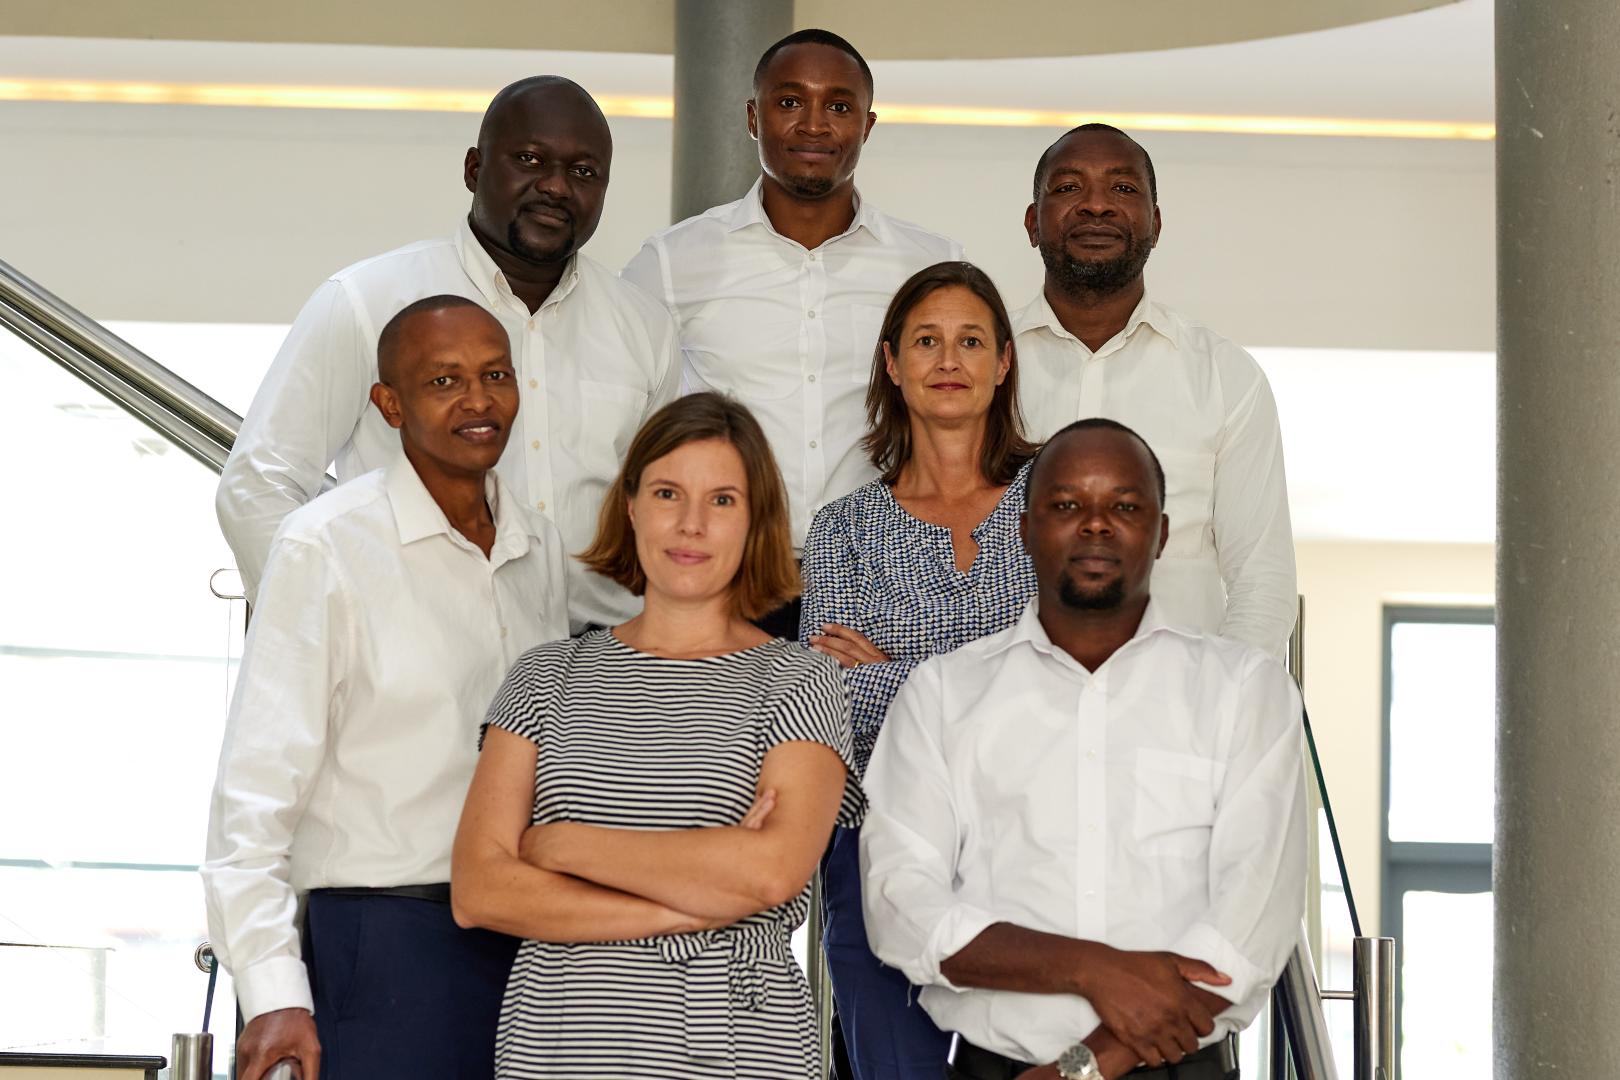 Team of the regional programme energy security and climate change in sub-saharan africa